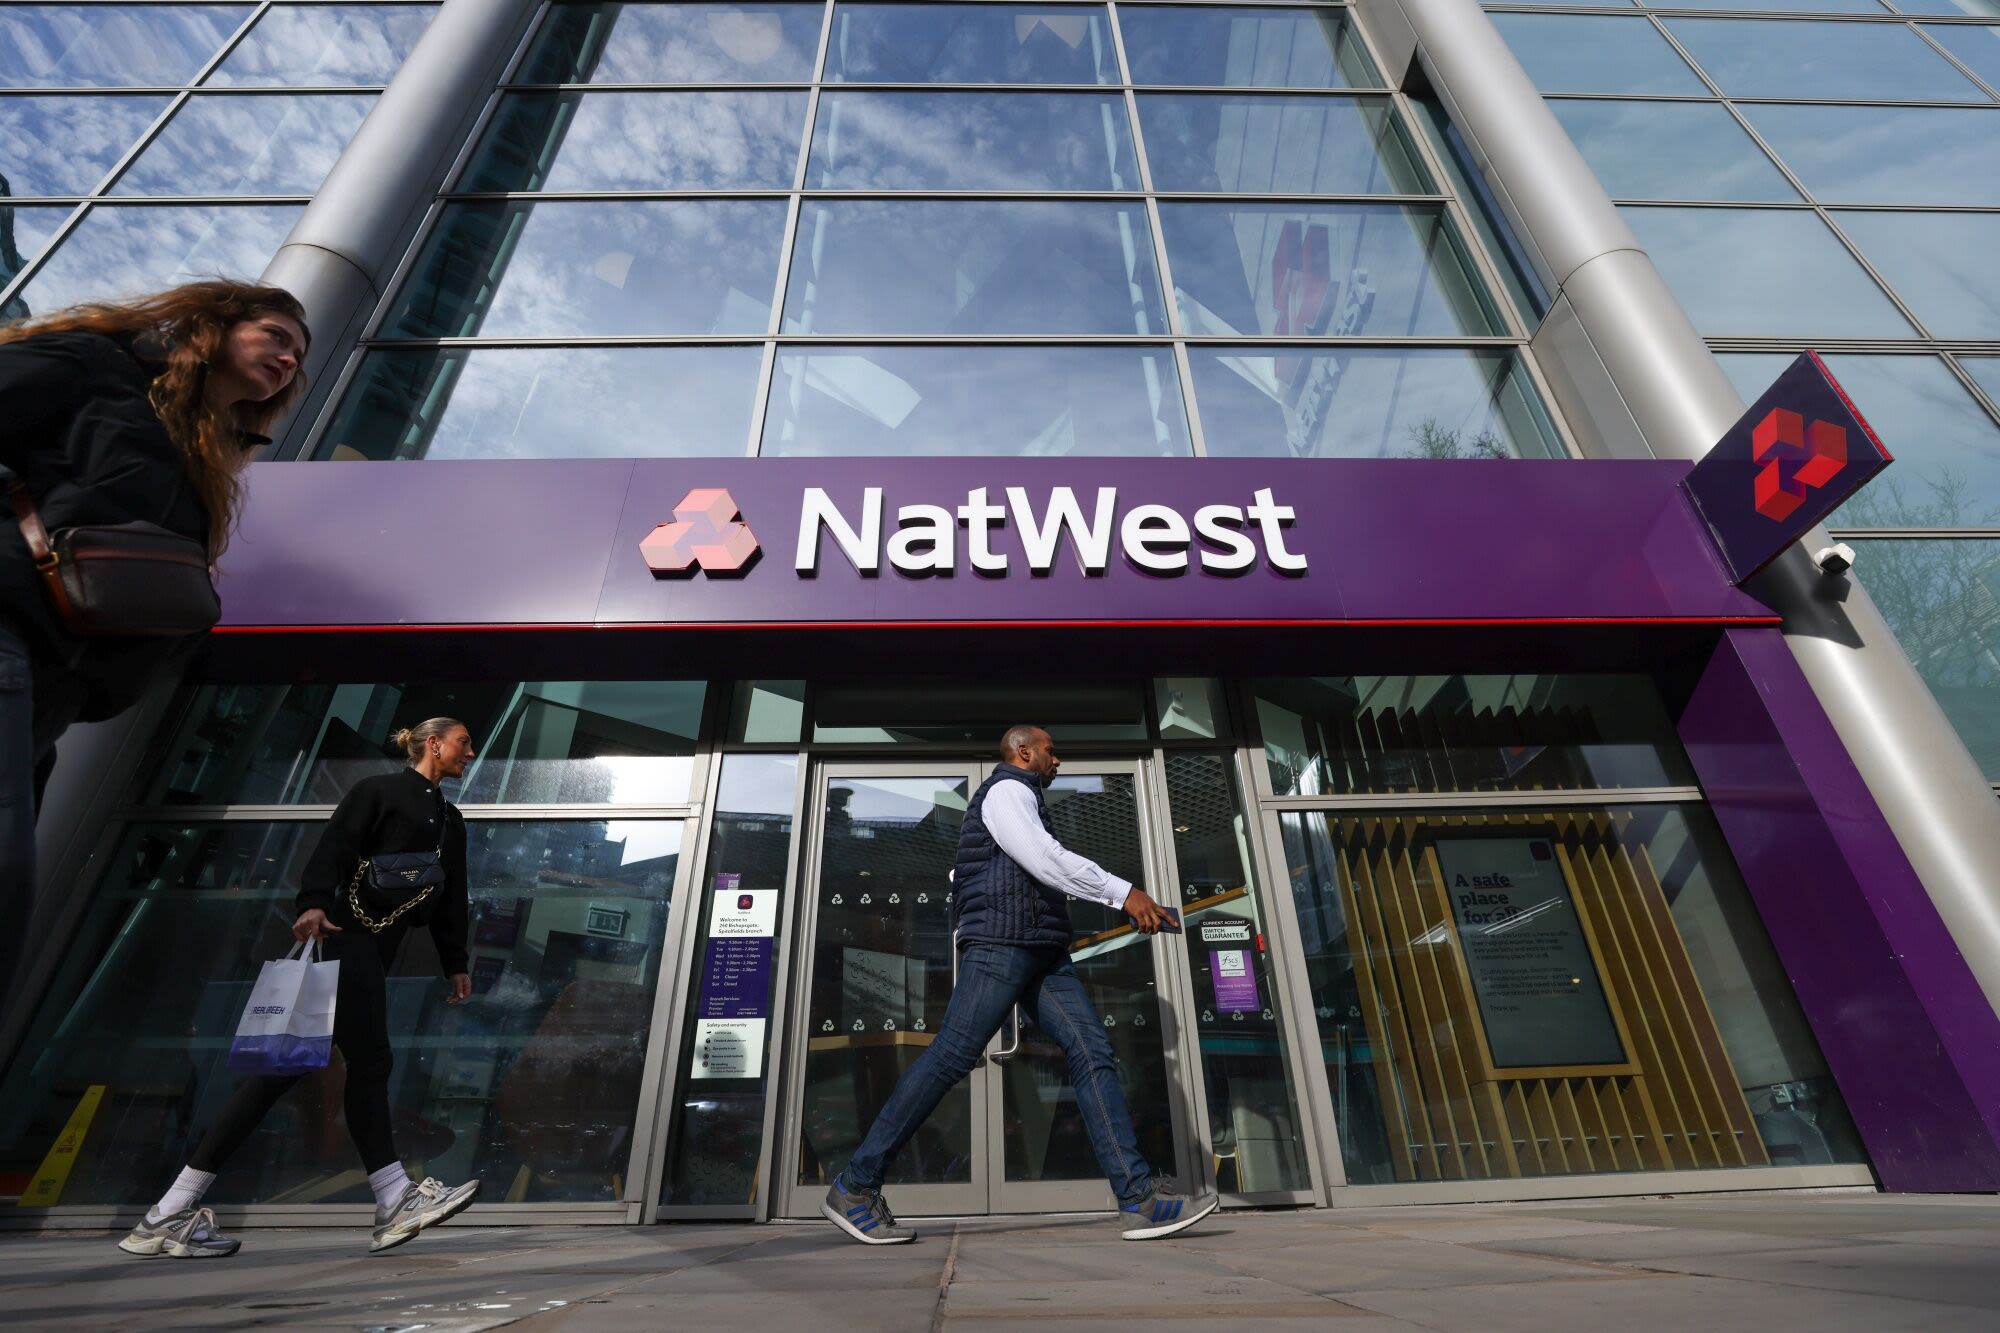 UK Government Speeds Up Plans to Dispose of NatWest Stake